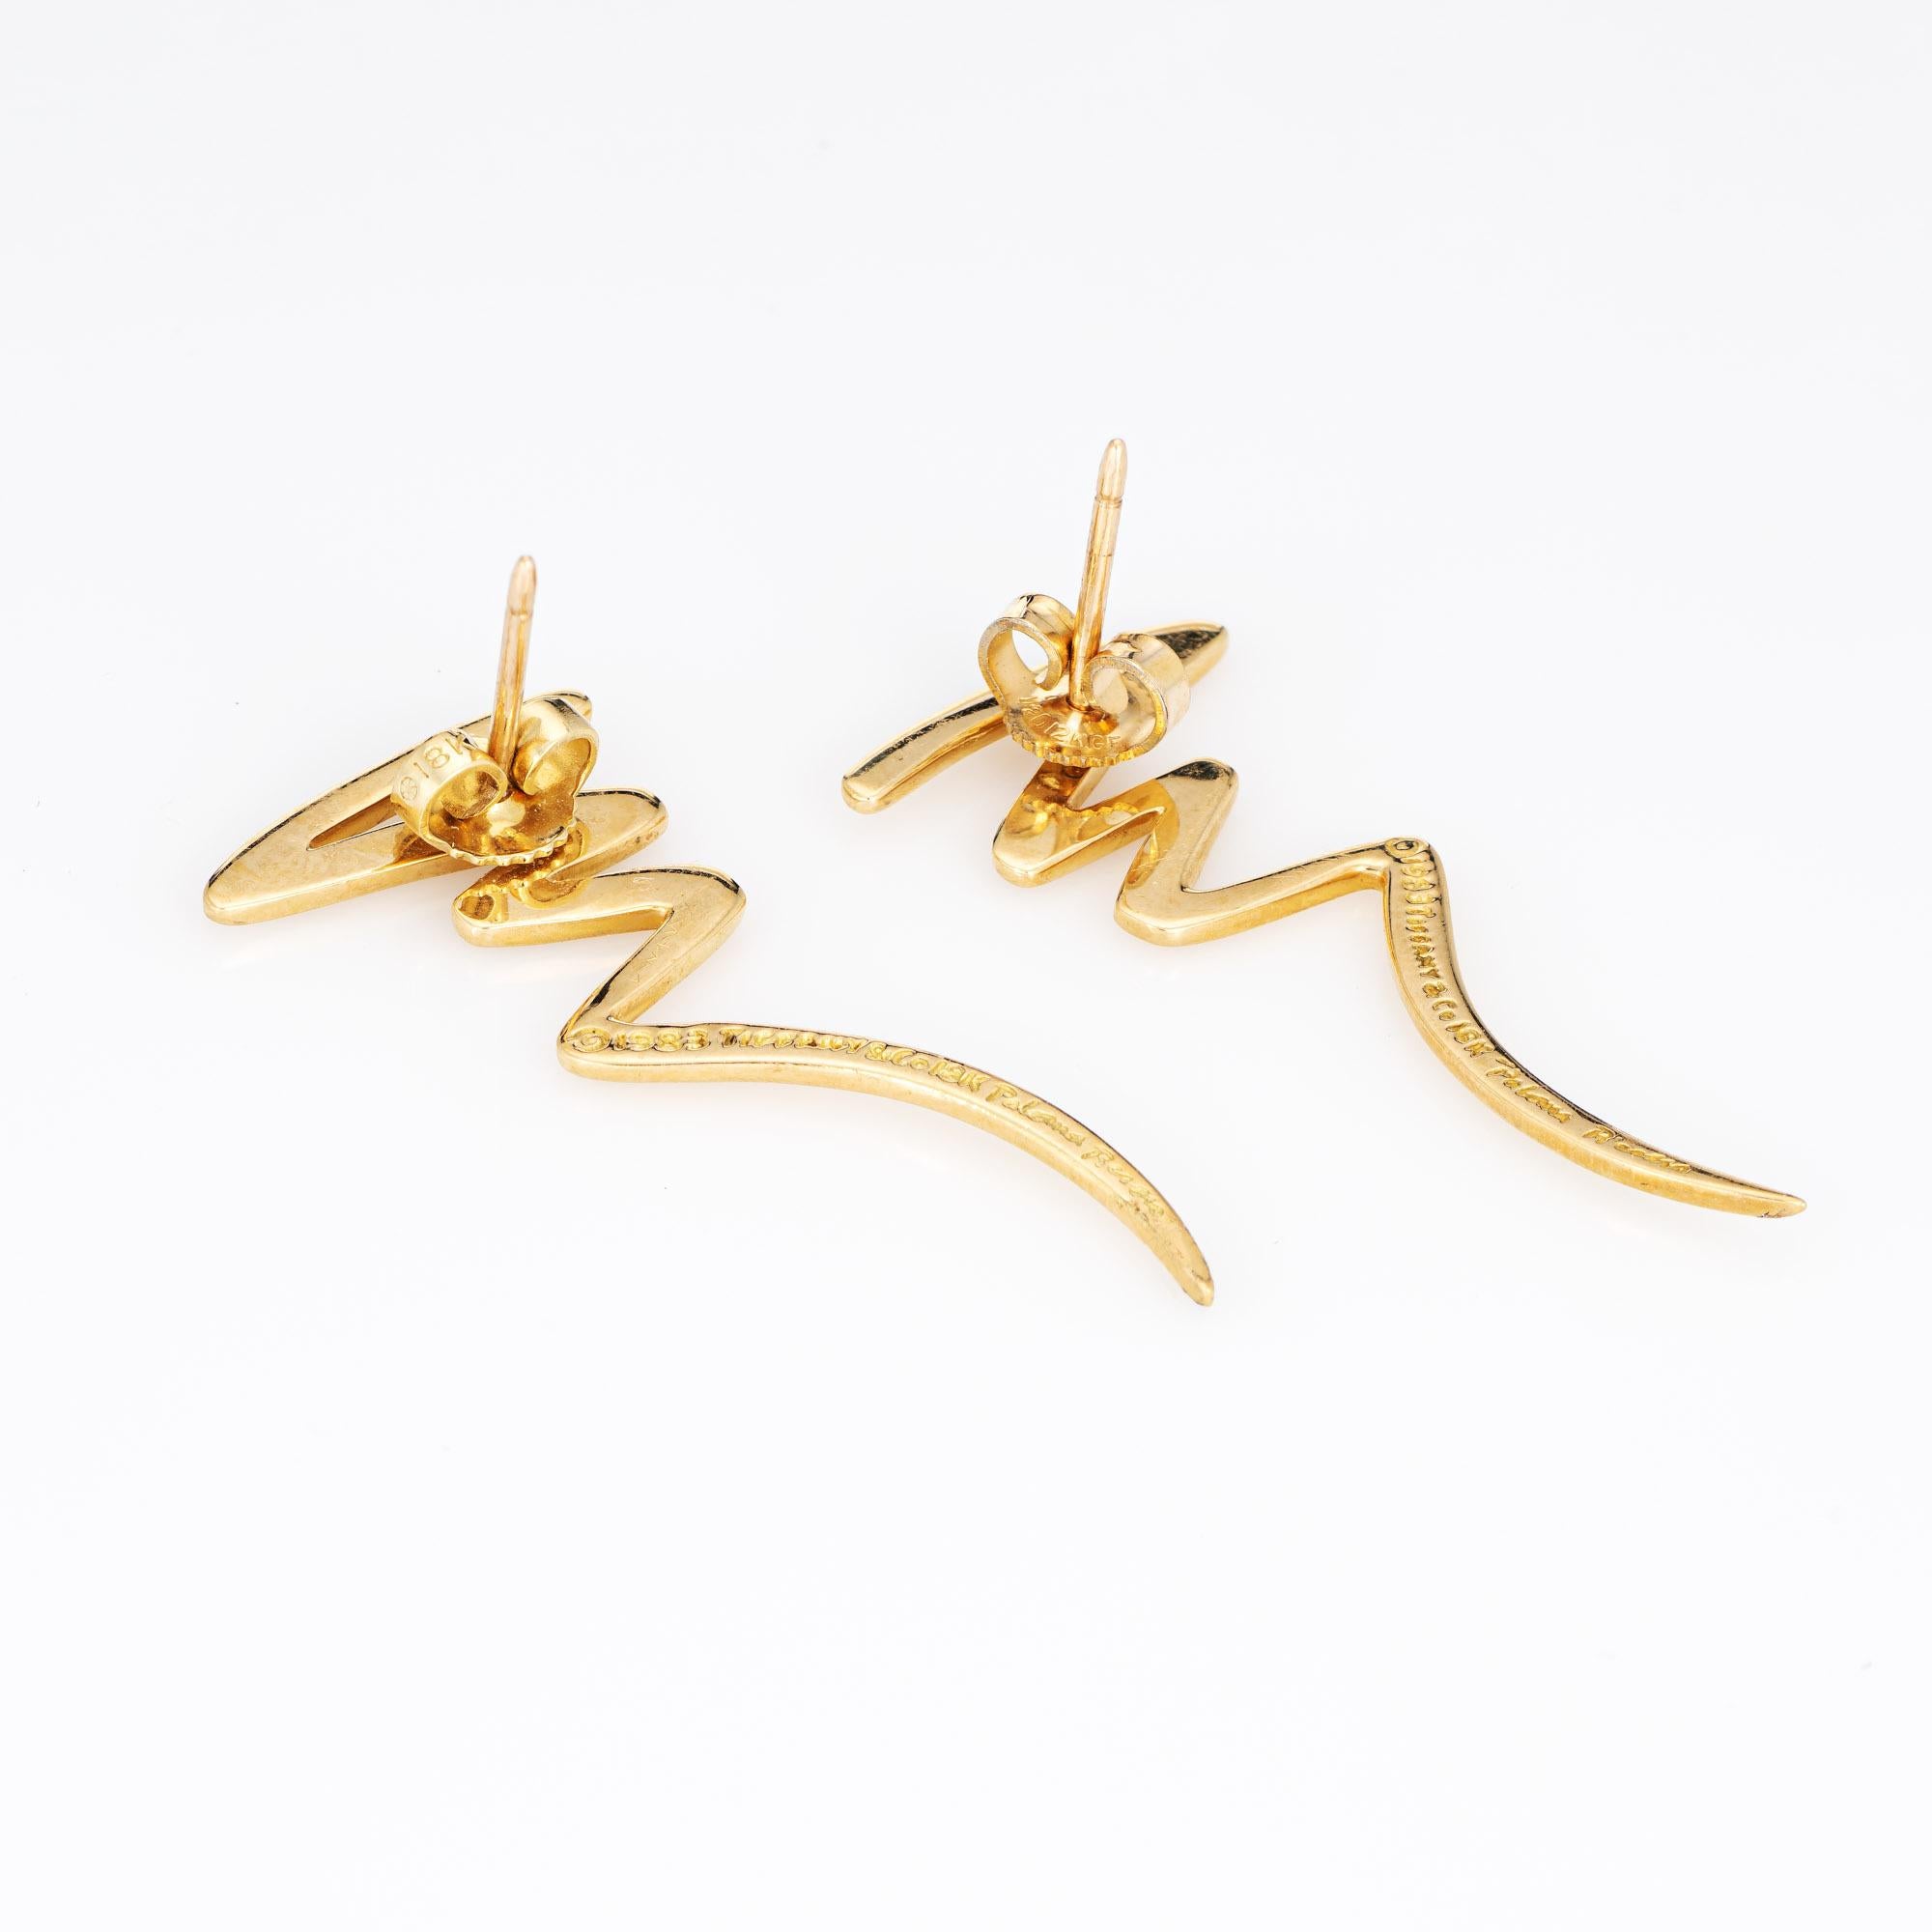 Elegant pair of vintage Tiffany & Co 'zig zag' earrings (circa 1983) crafted in 18k yellow gold. 

The earrings are designed by Paloma Picasso for Tiffany & Co, dating to 1983. The distinct design is timeless and great for day or evening wear. The